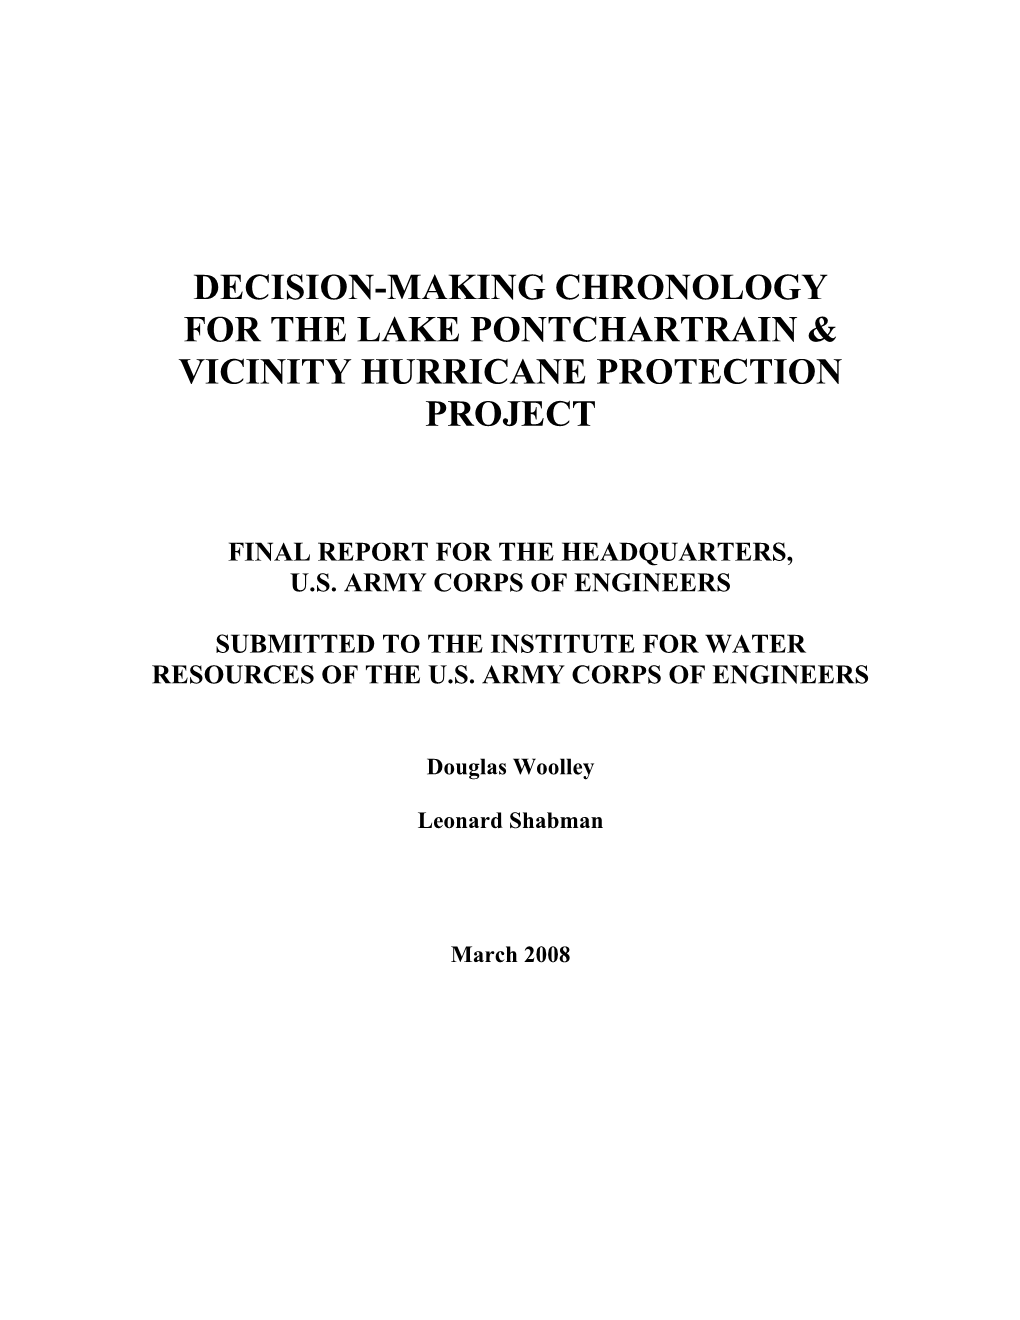 Decision-Making Chronology for the Lake Pontchartrain & Vicinity